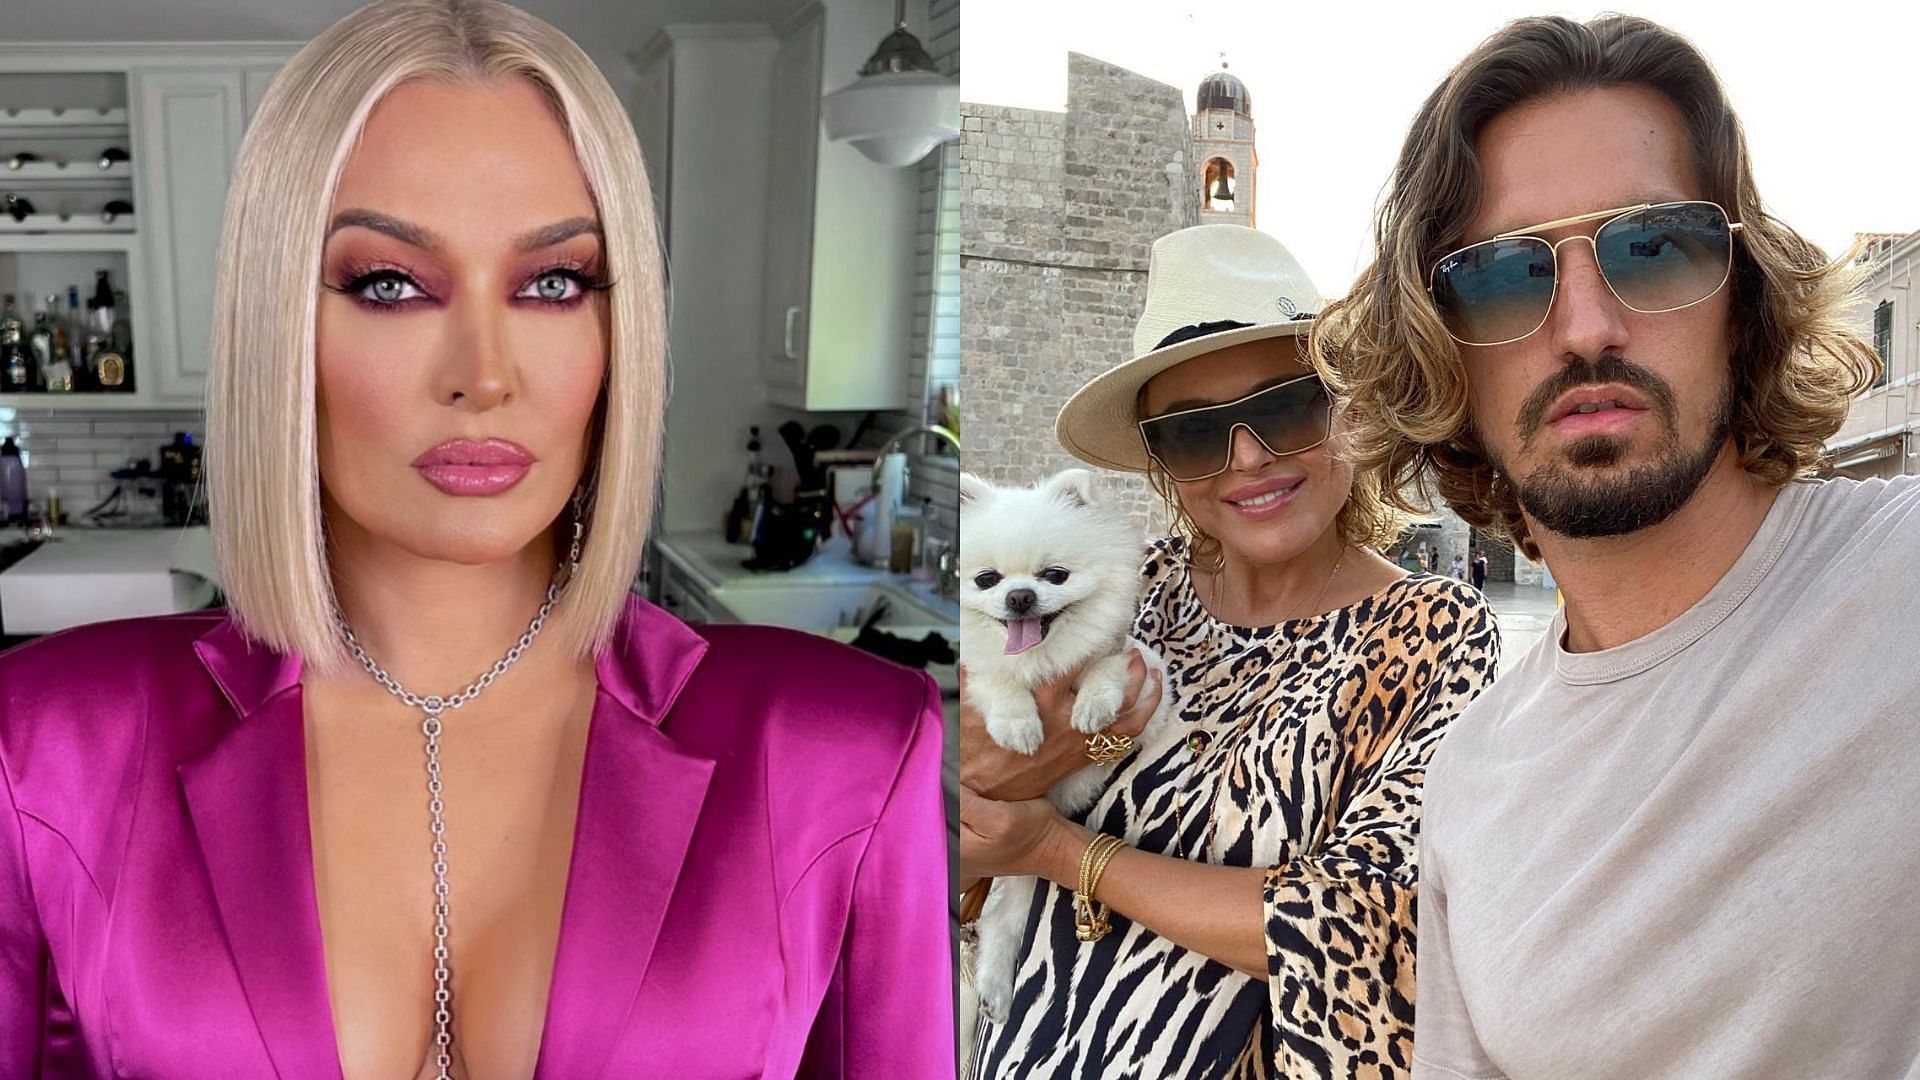 RHOBH&#039;s Erika Jayne [left] and Diana Jenkins with Asher [right] (Image via theprettymess, sdjneuro/Instagram)